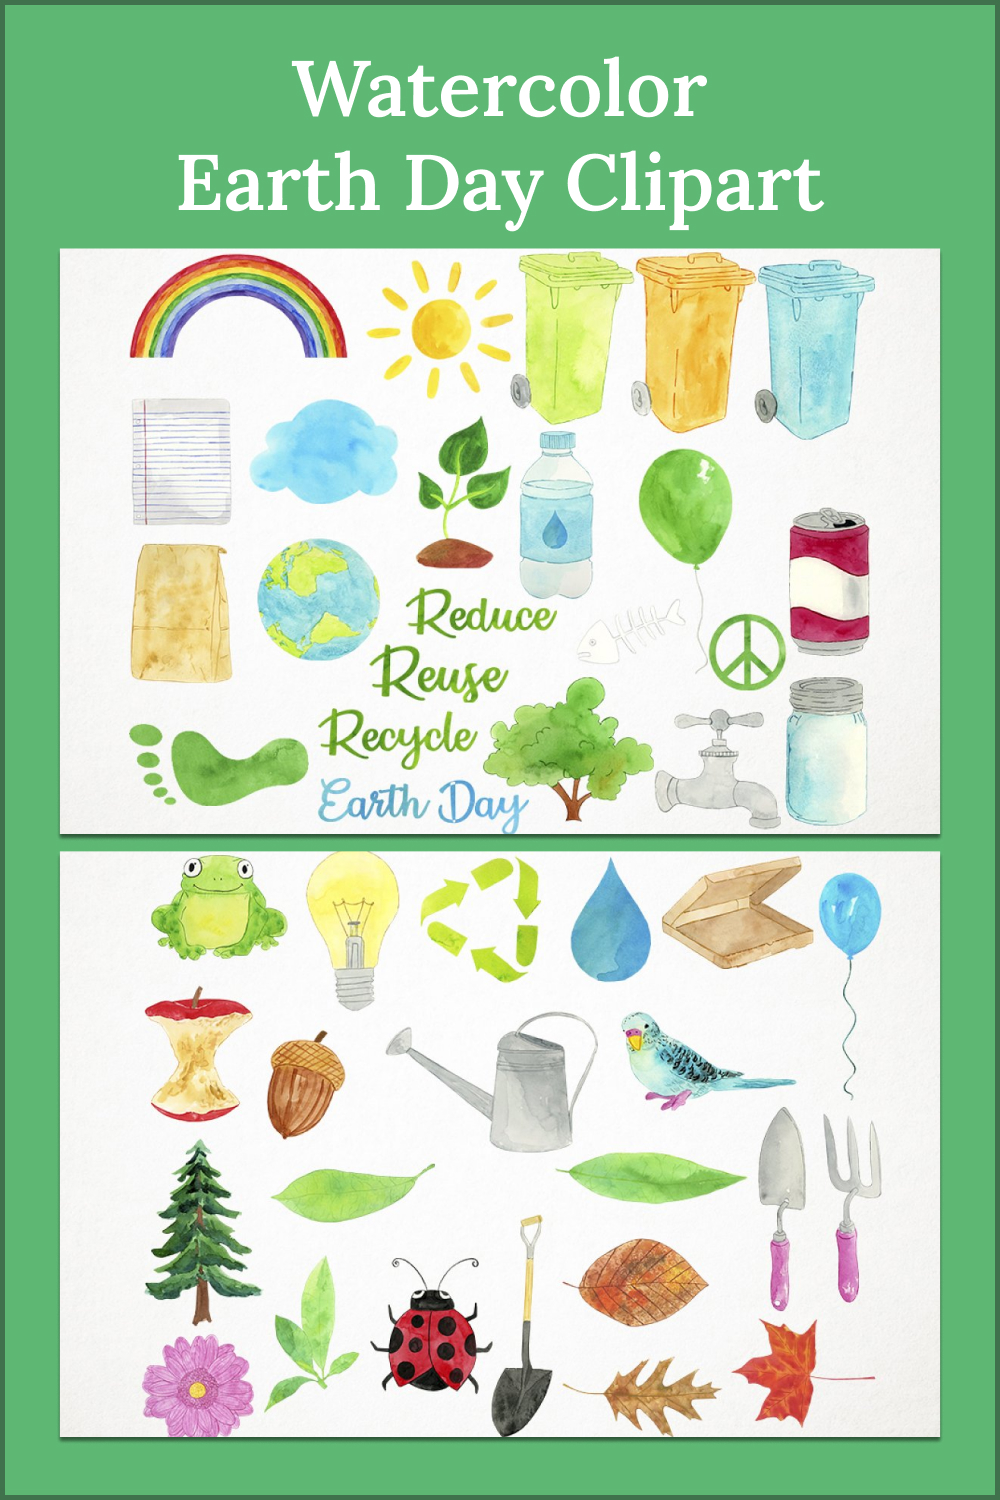 Watercolor earth day clipart of pinterest.